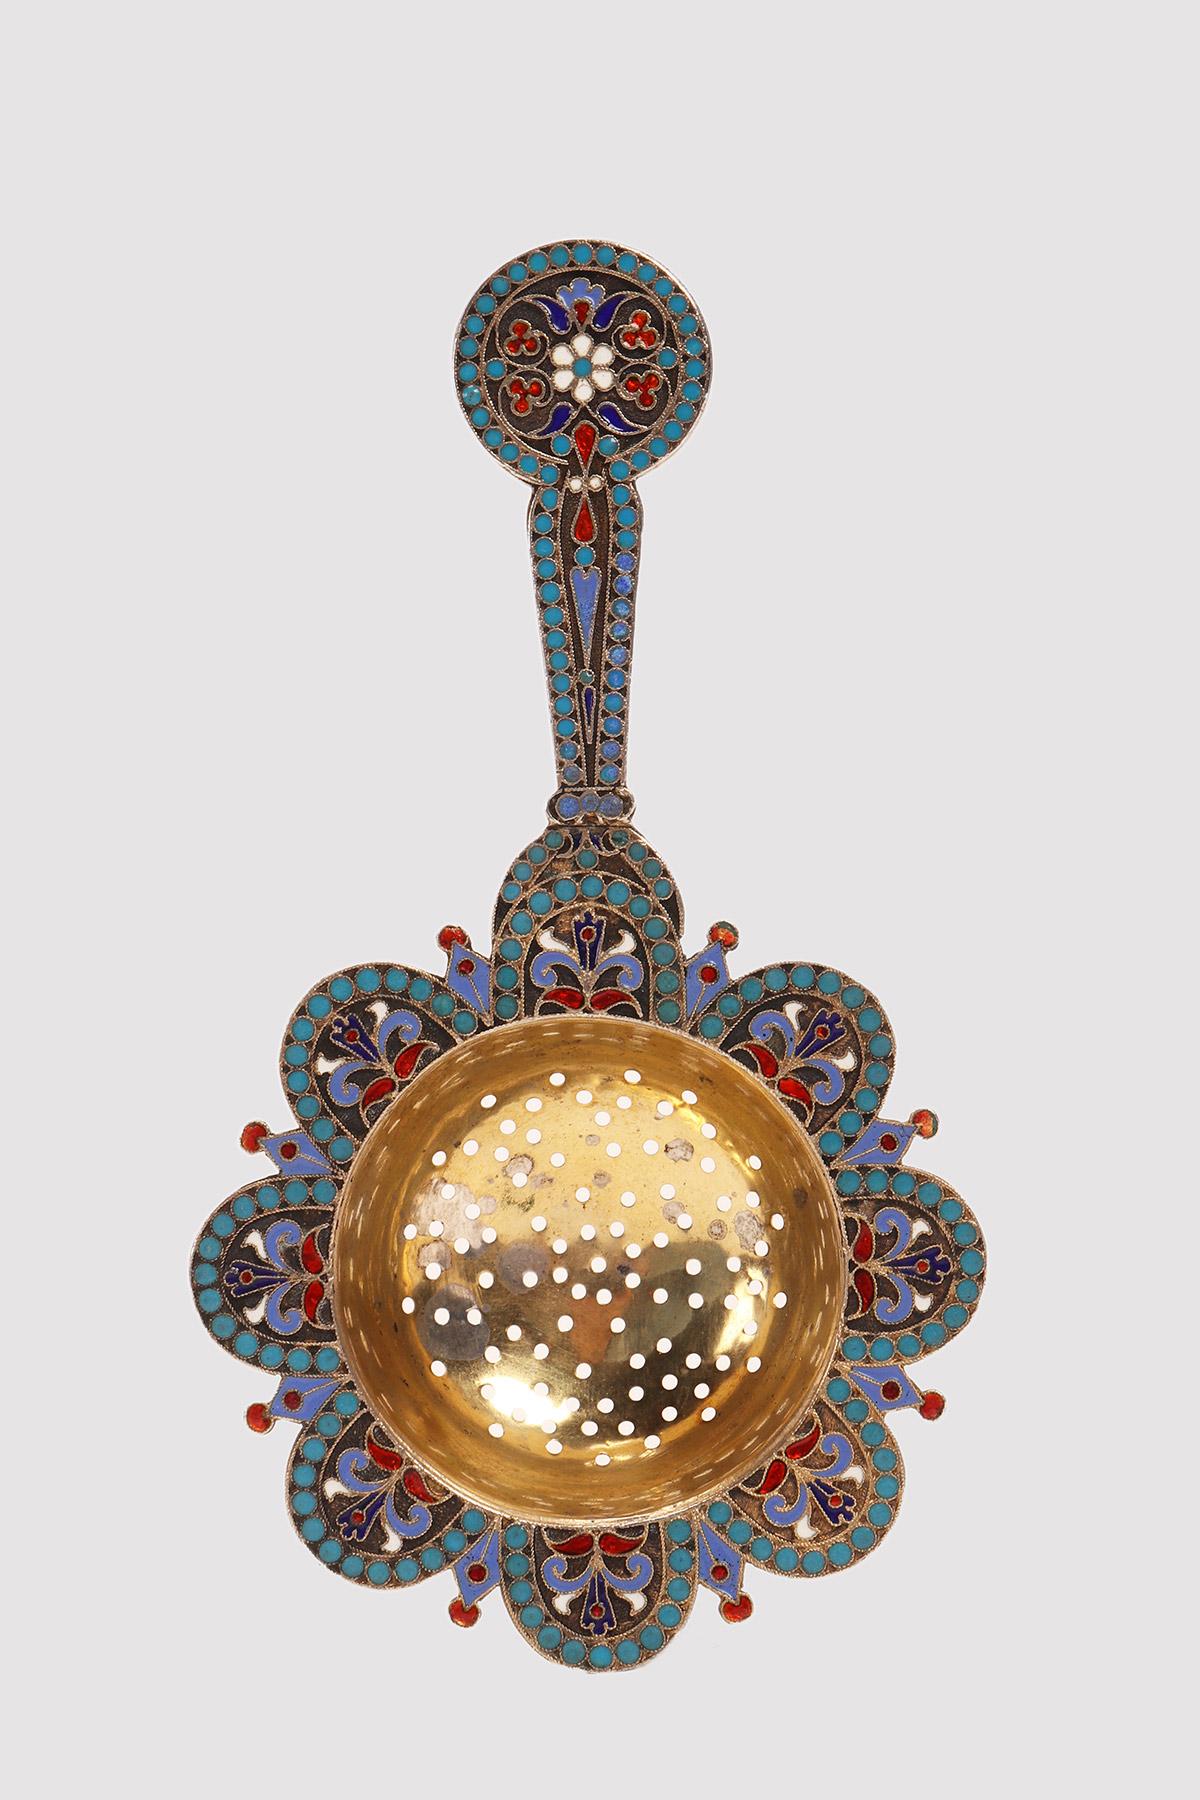 Tea strainer with handle, in 84 Zolotnik silver, gilded and decorated with floral and geometric enamels, cloisonné in white, blue, purple and red. Moscow, Russia, 1884.